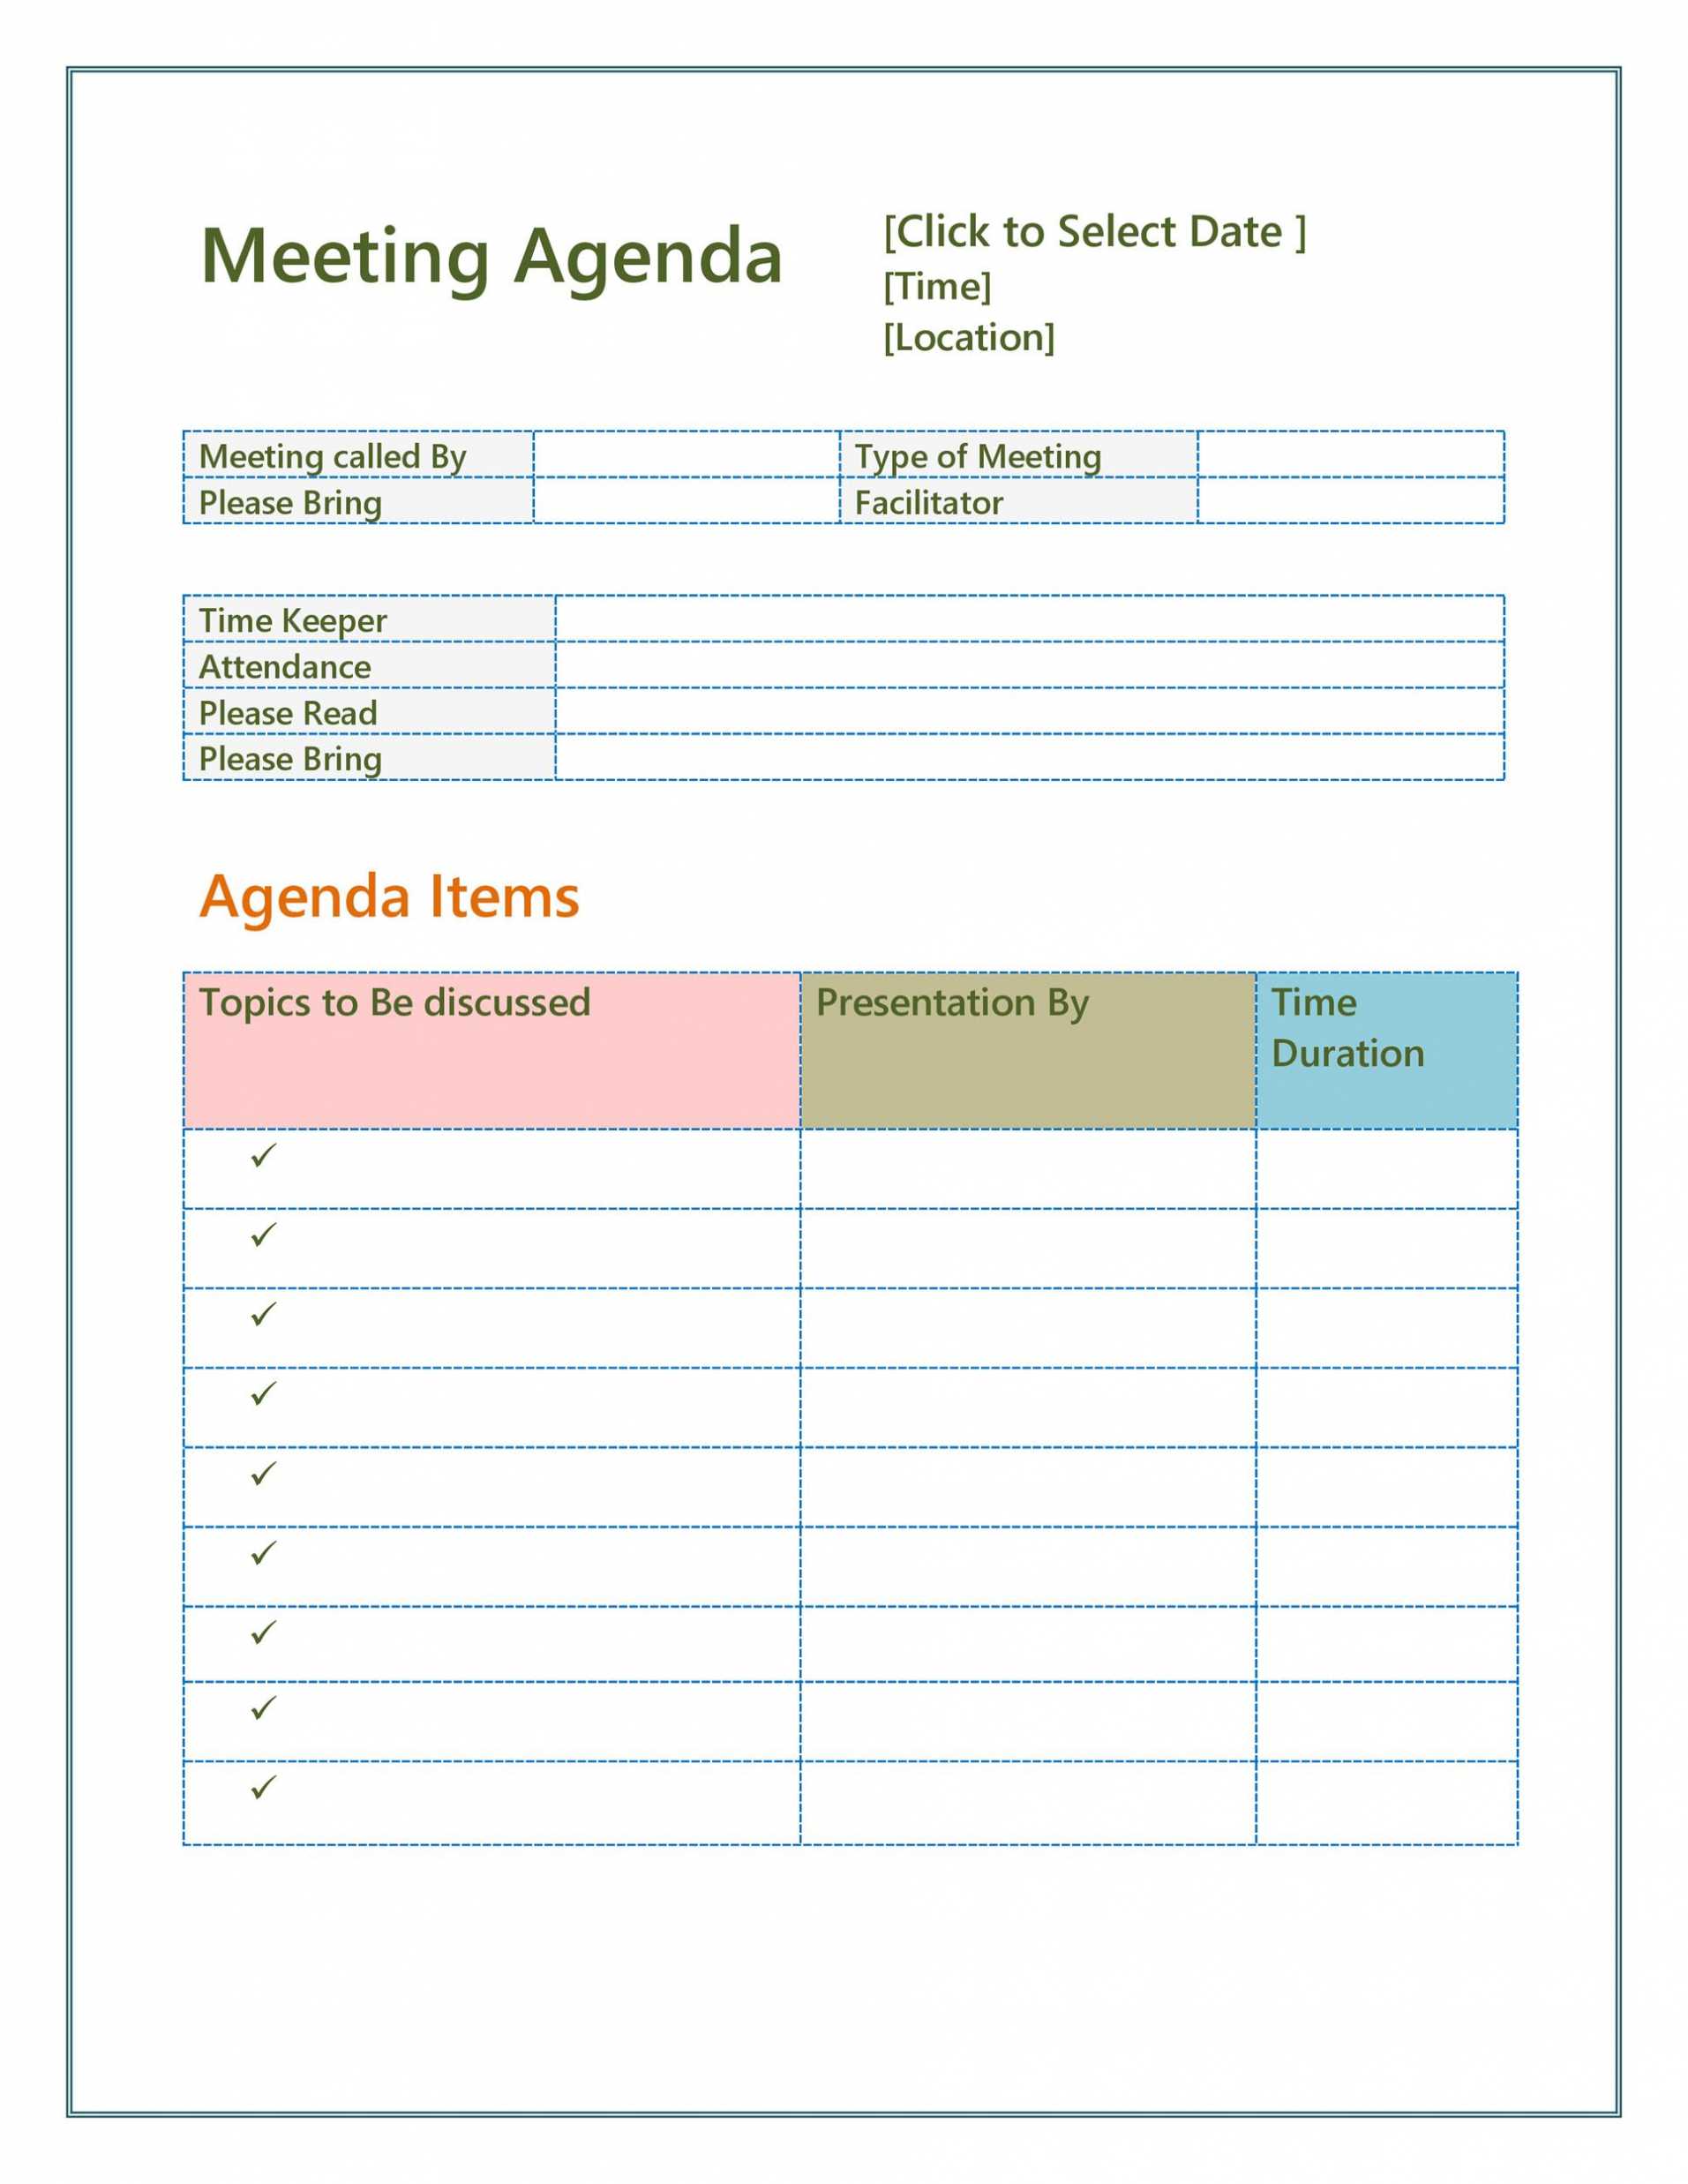 46 Effective Meeting Agenda Templates ᐅ Templatelab pertaining to Free Meeting Agenda Templates For Word